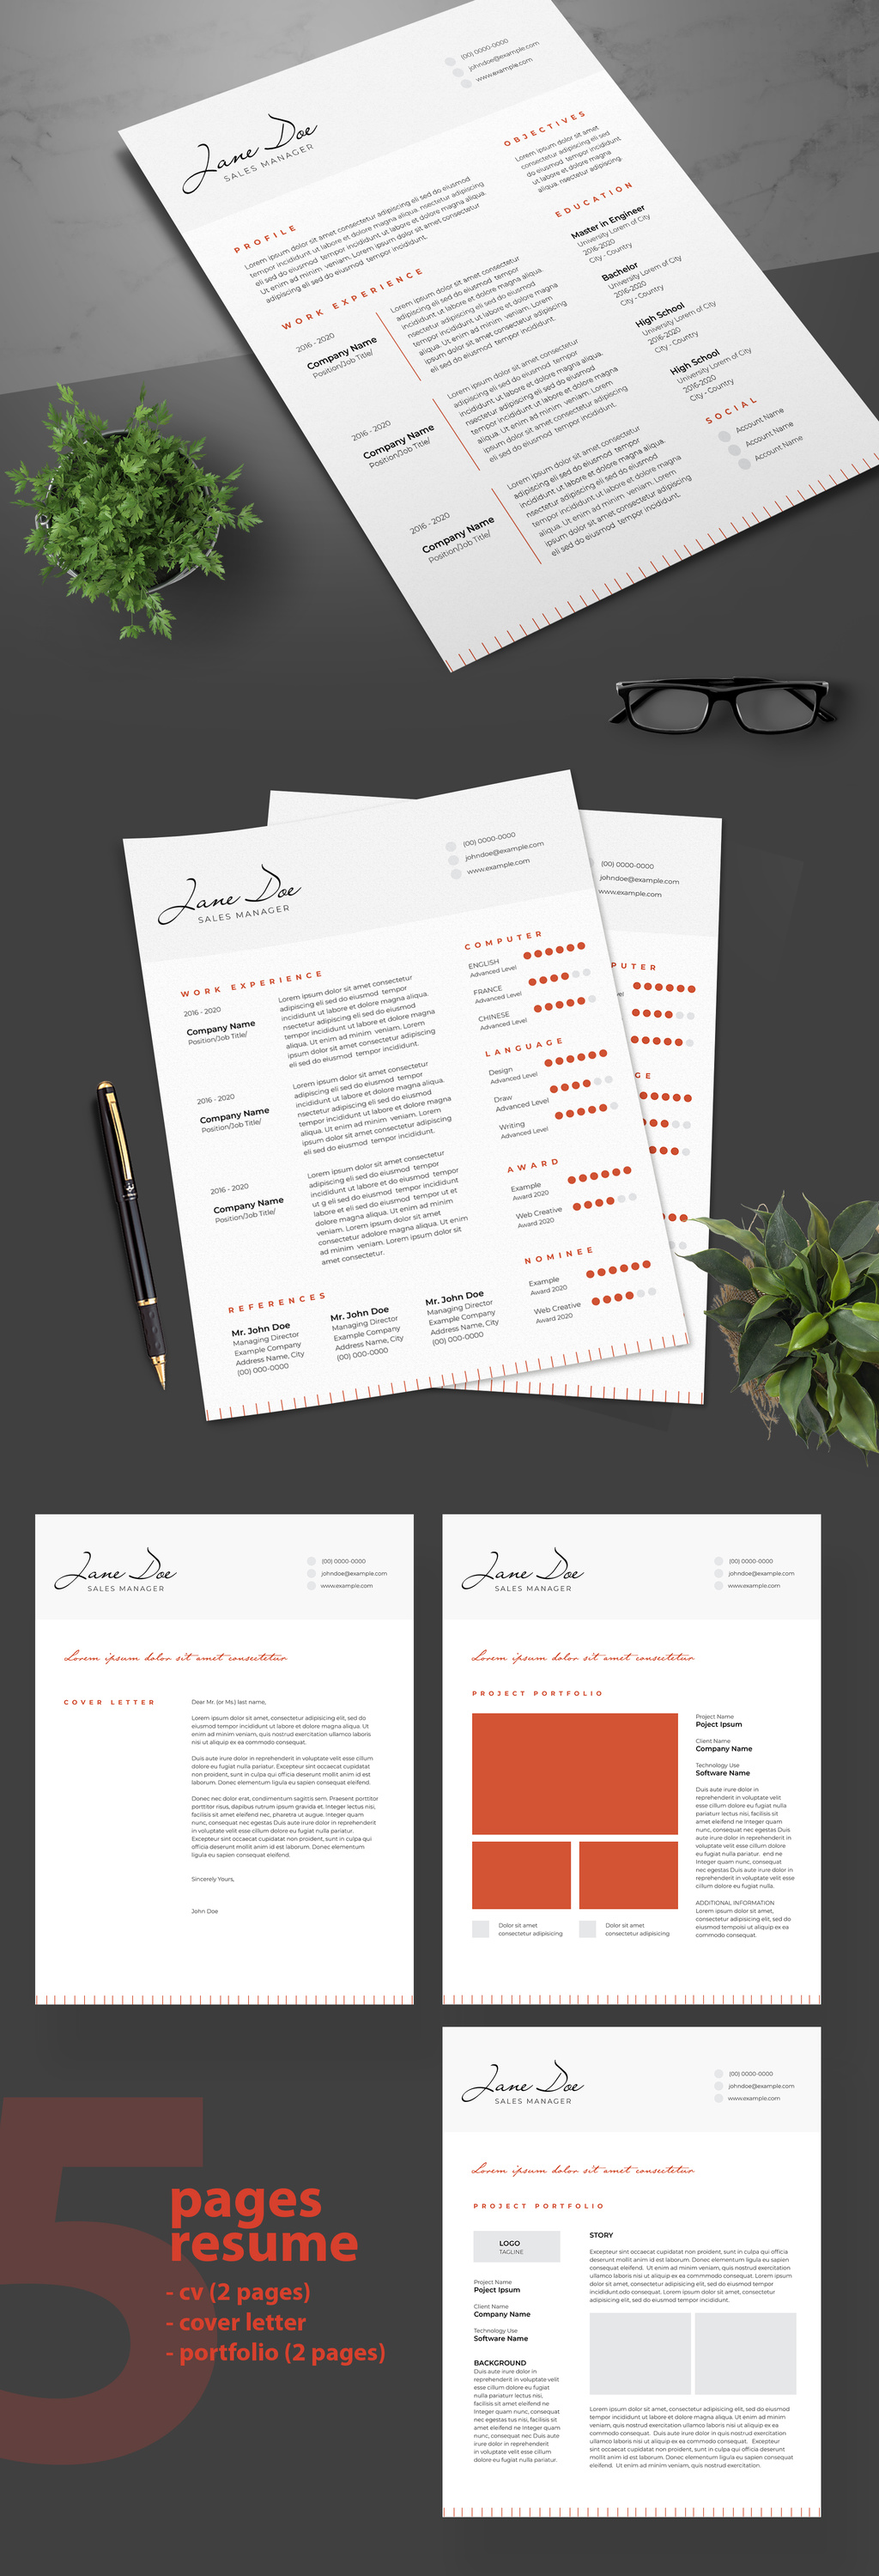 Resume Adobe InDesign template with dark orange accents from @afahmy.